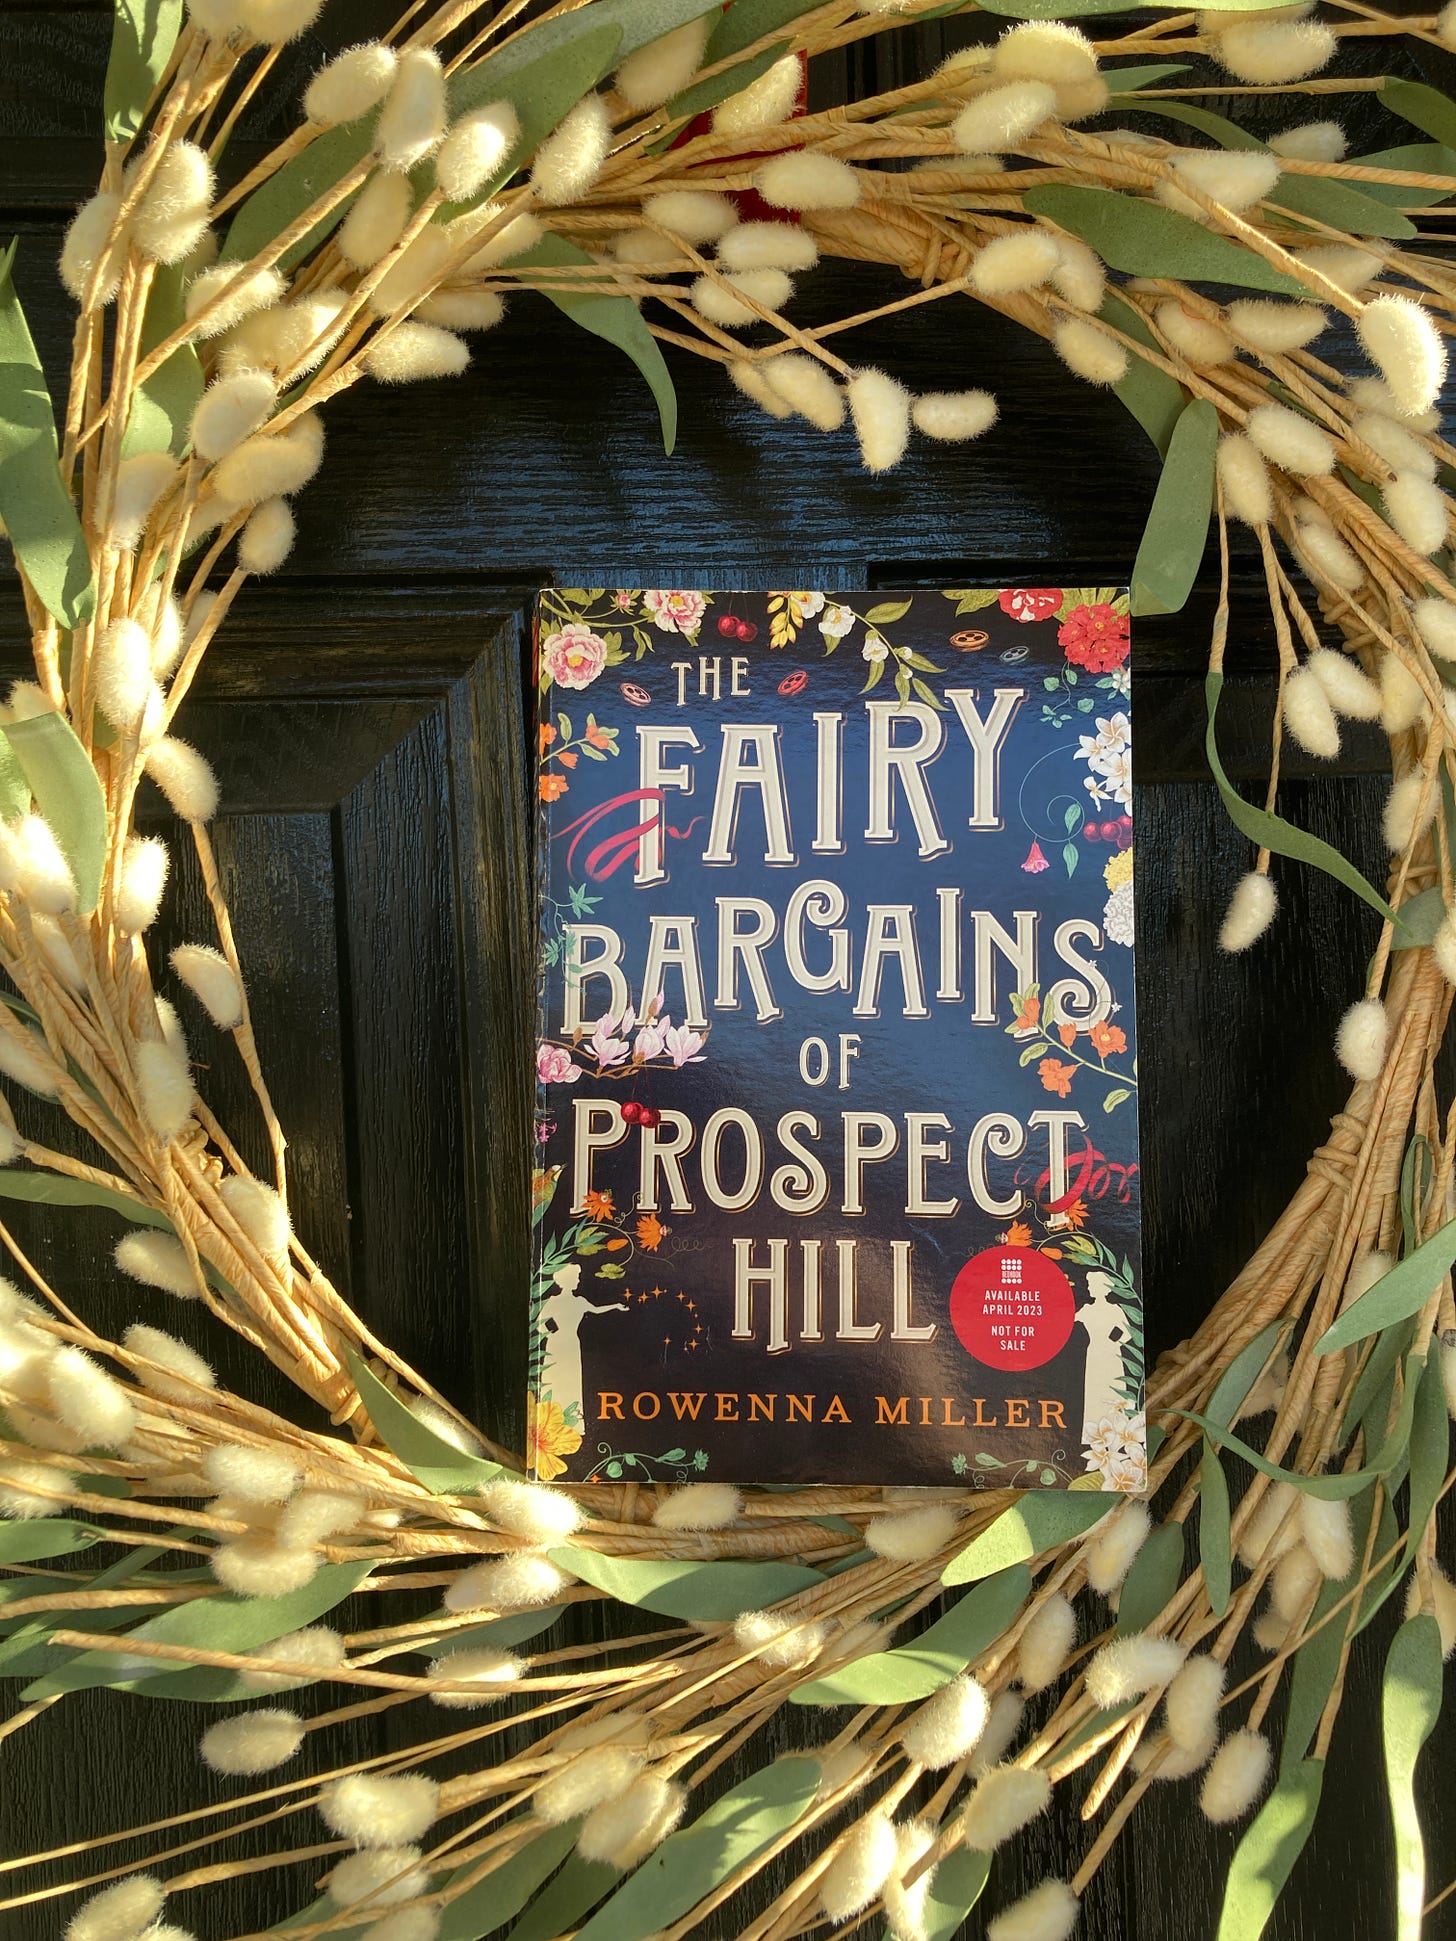 Book, THE FAIRY BARGAINS OF PROSPECT HILL by Rowenna Miller, set within a wreath of white and green willow branches against a black door